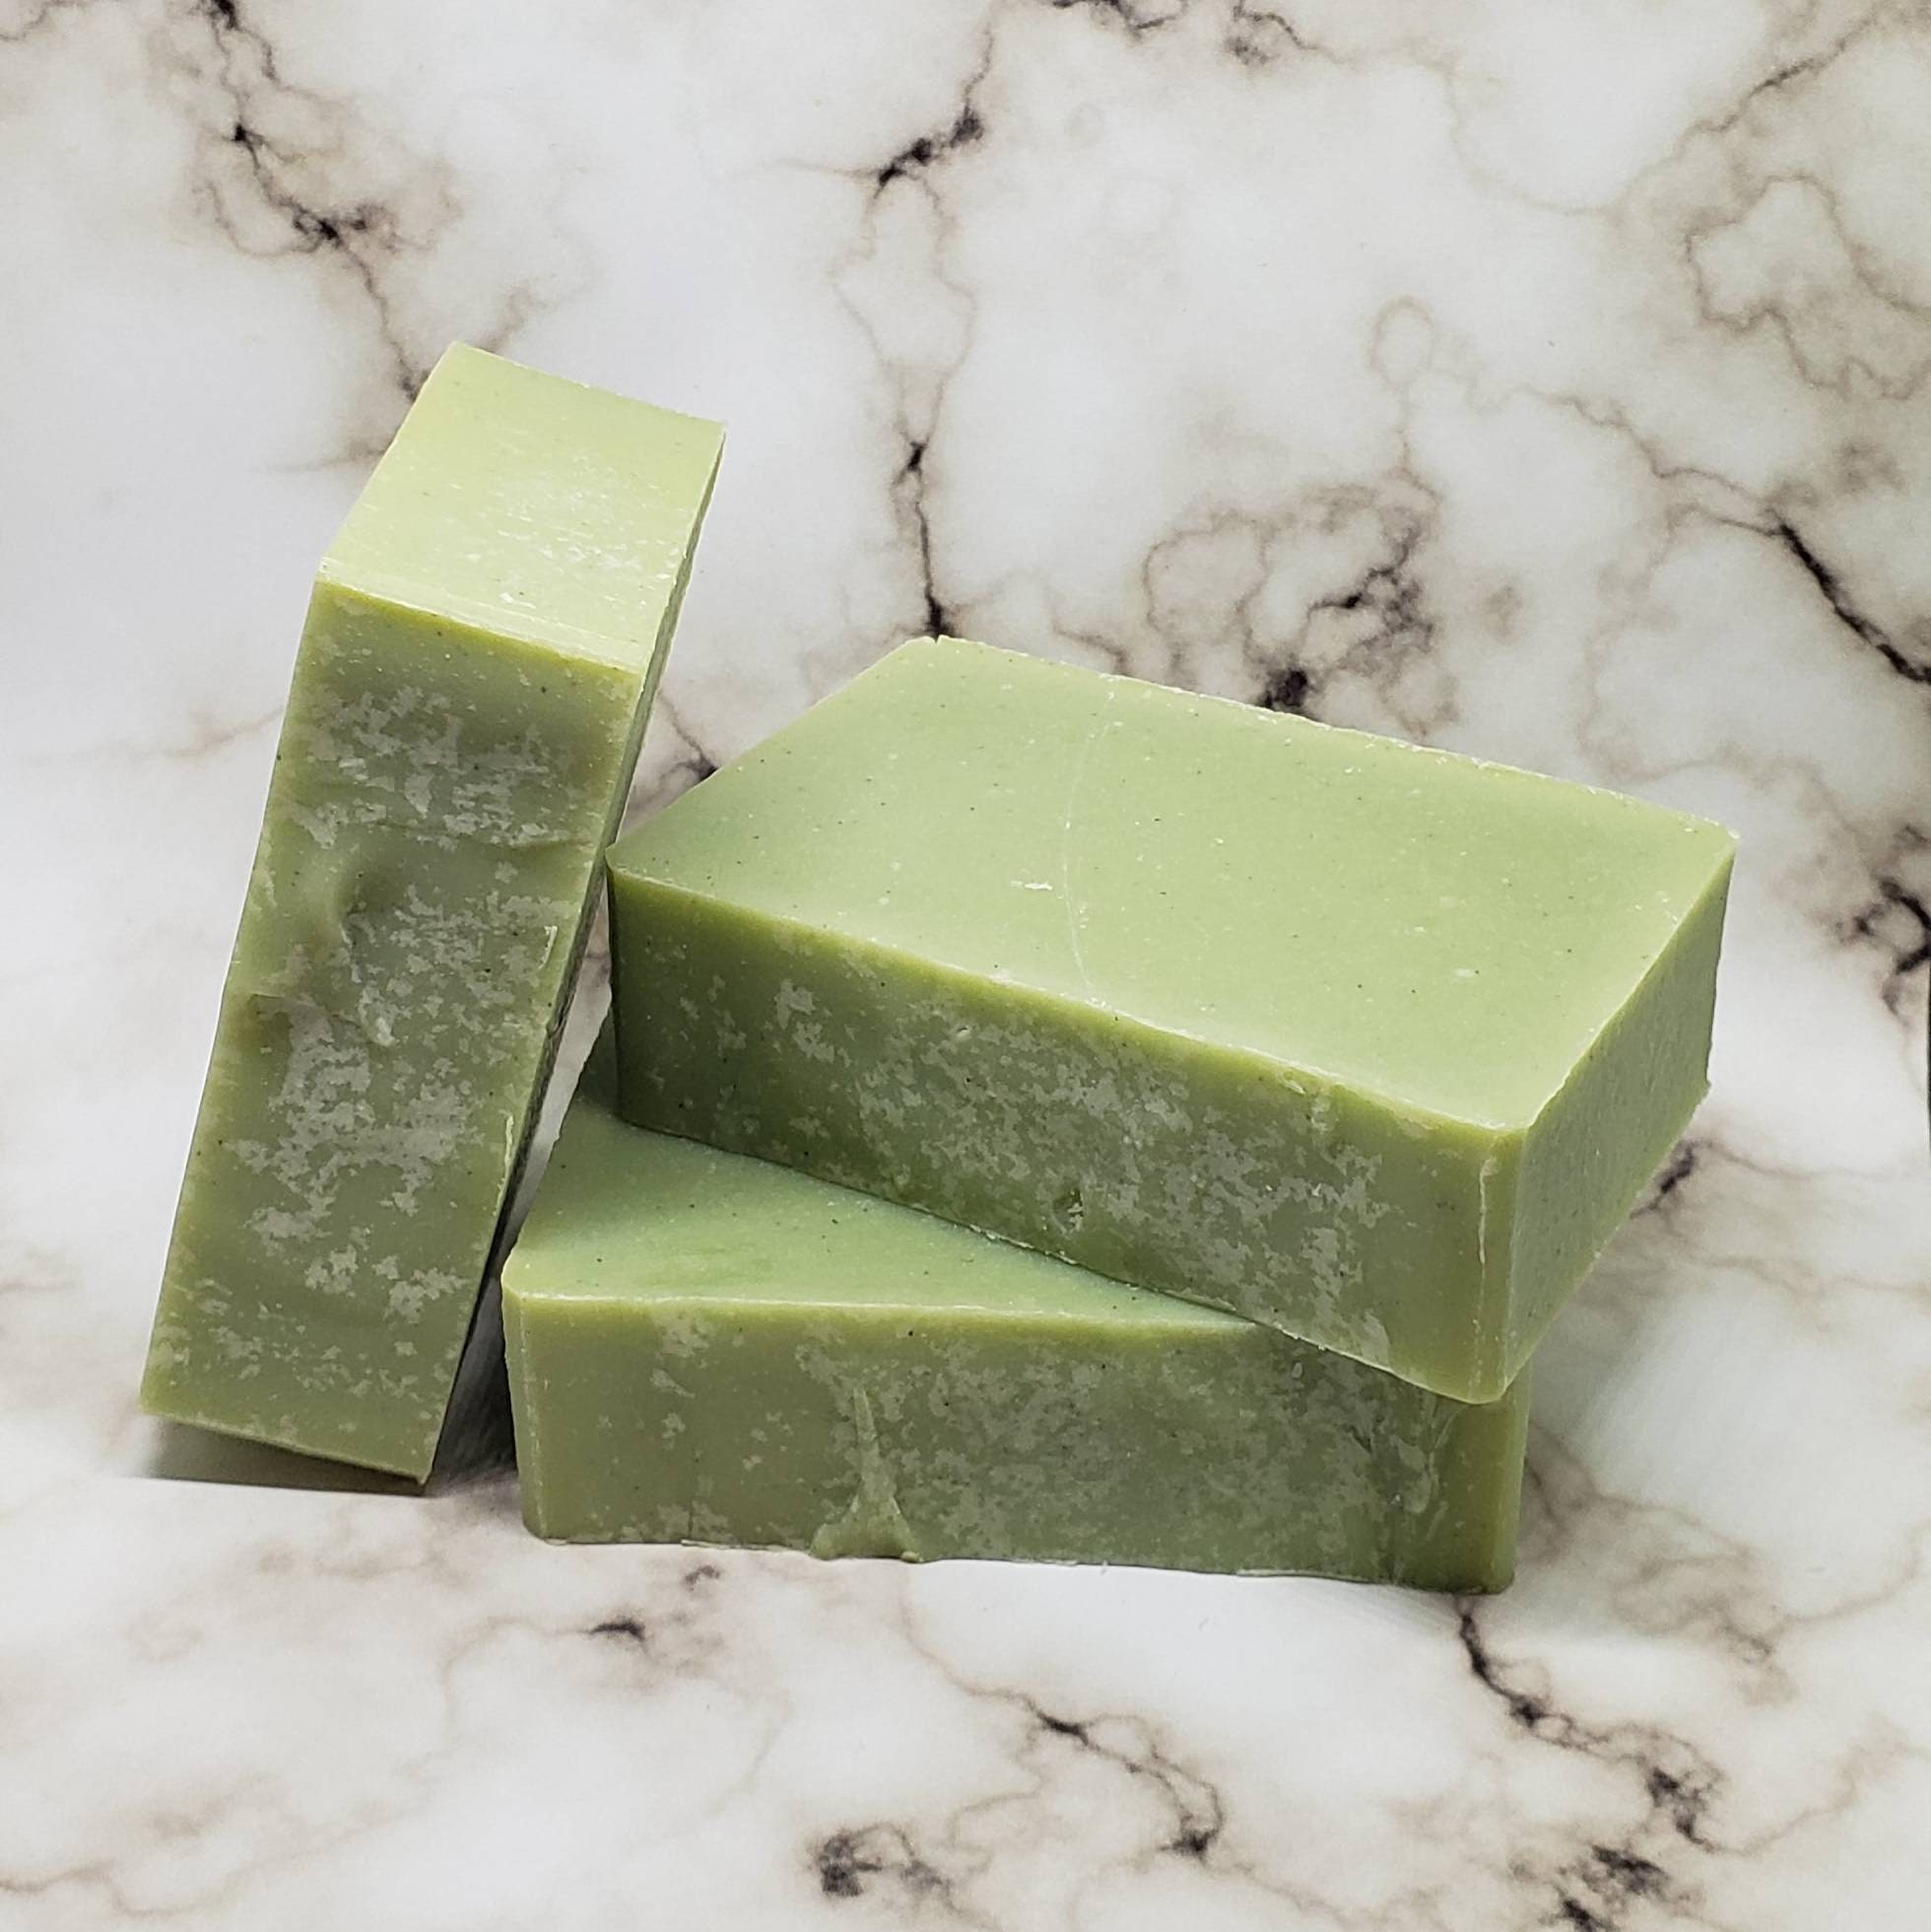 Peppermint Pumice Gardener's Herbal Soap Handcrafted Natural Soap